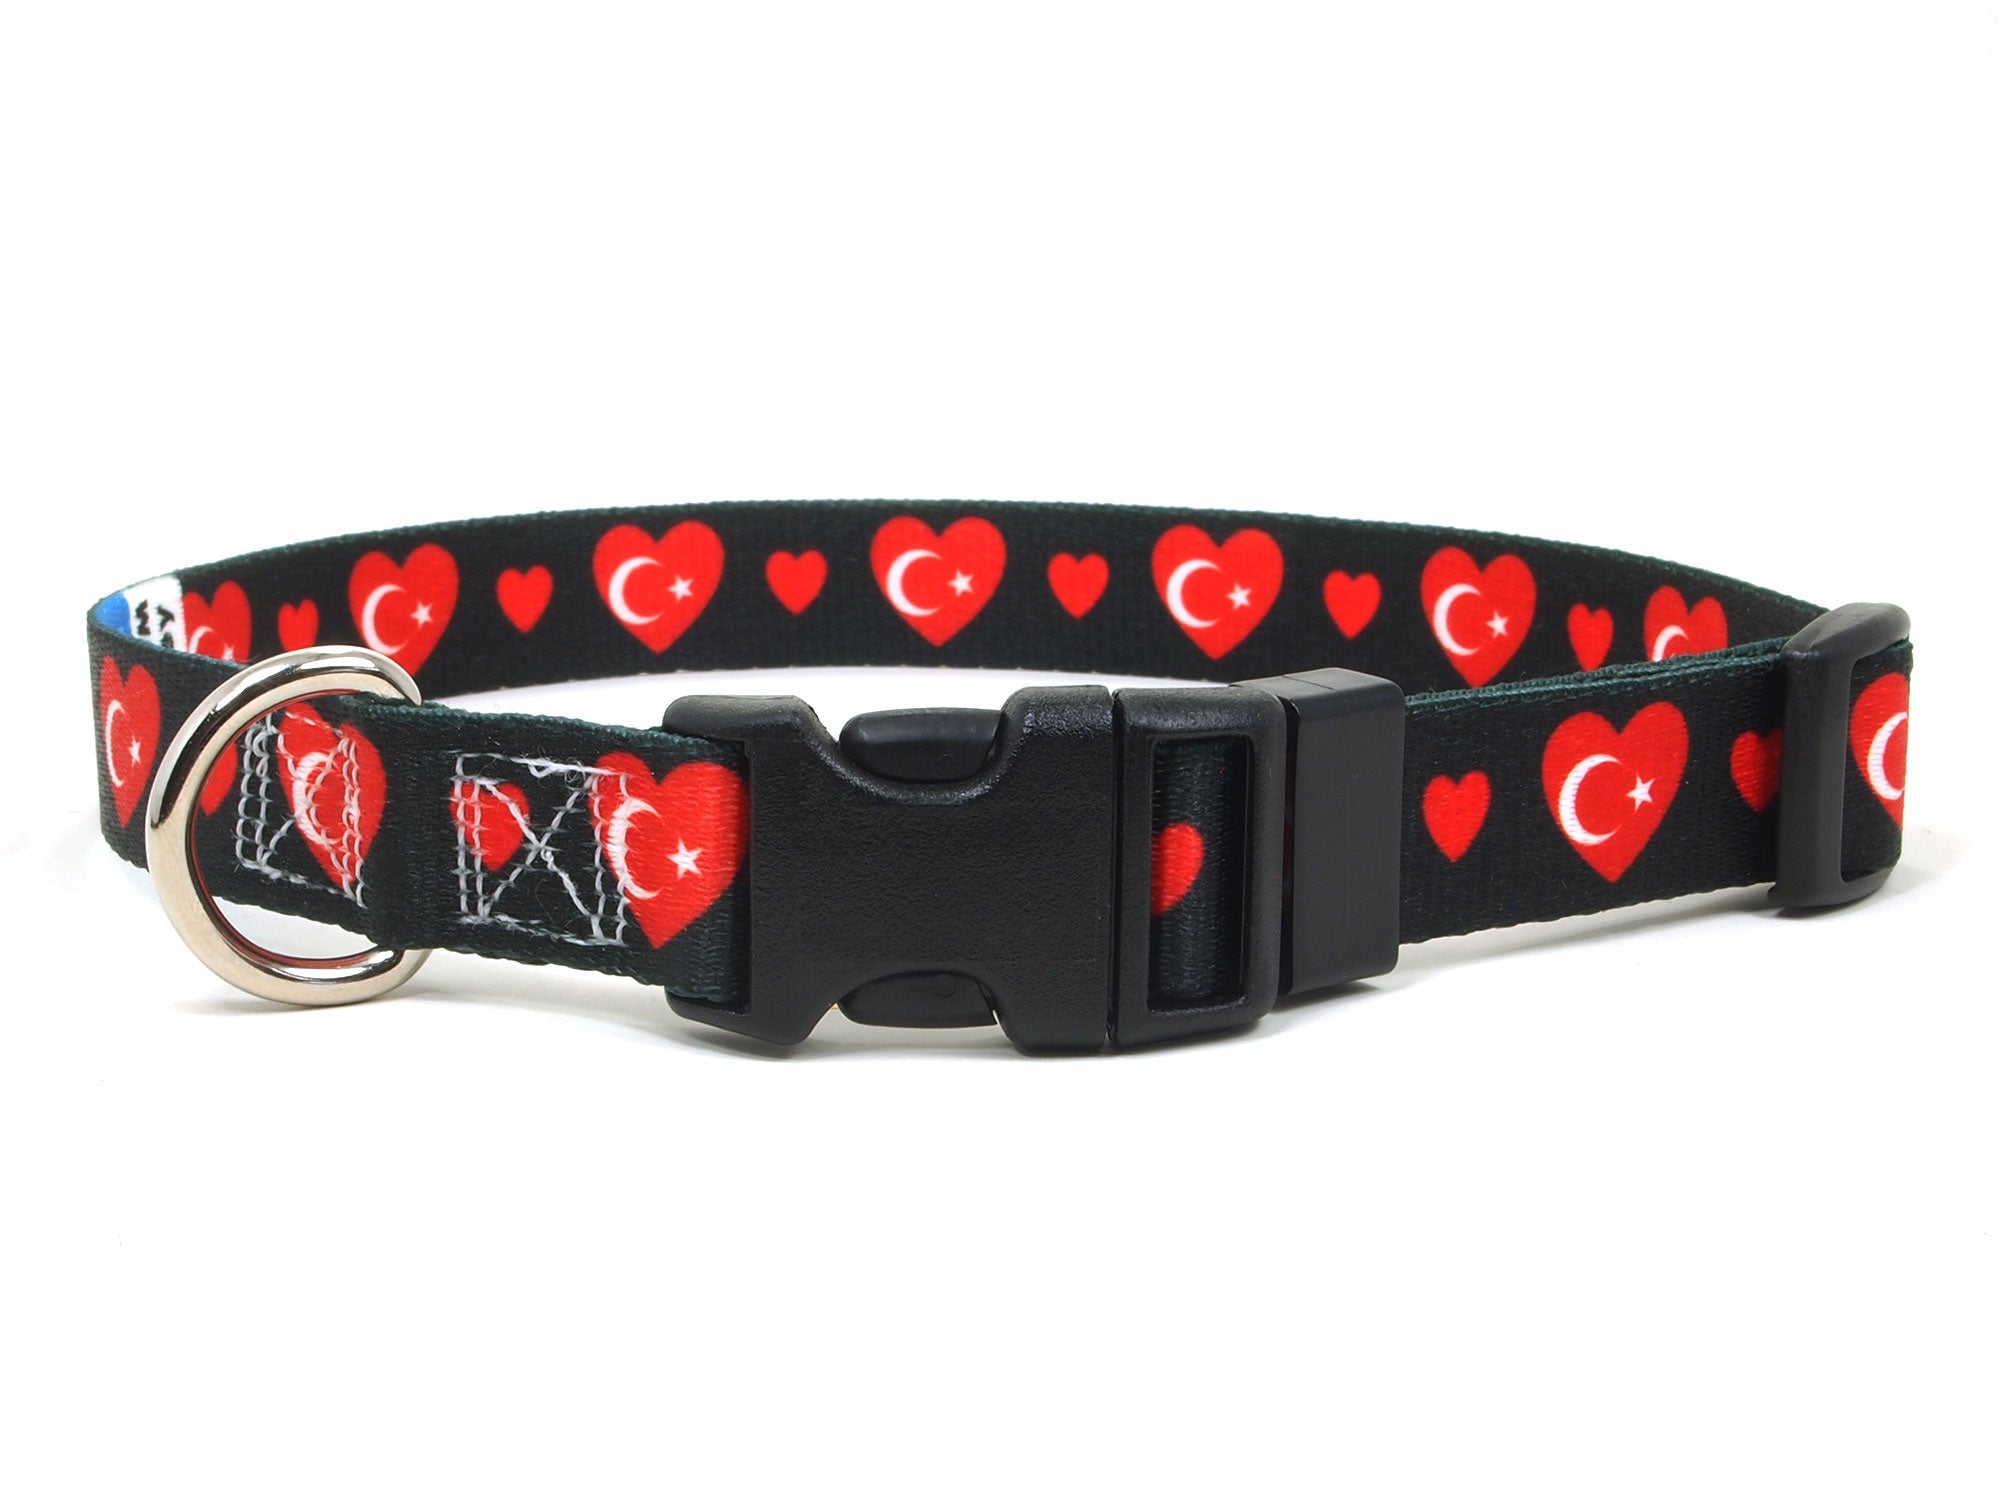 Dog Collar with Turkey Hearts Pattern in black